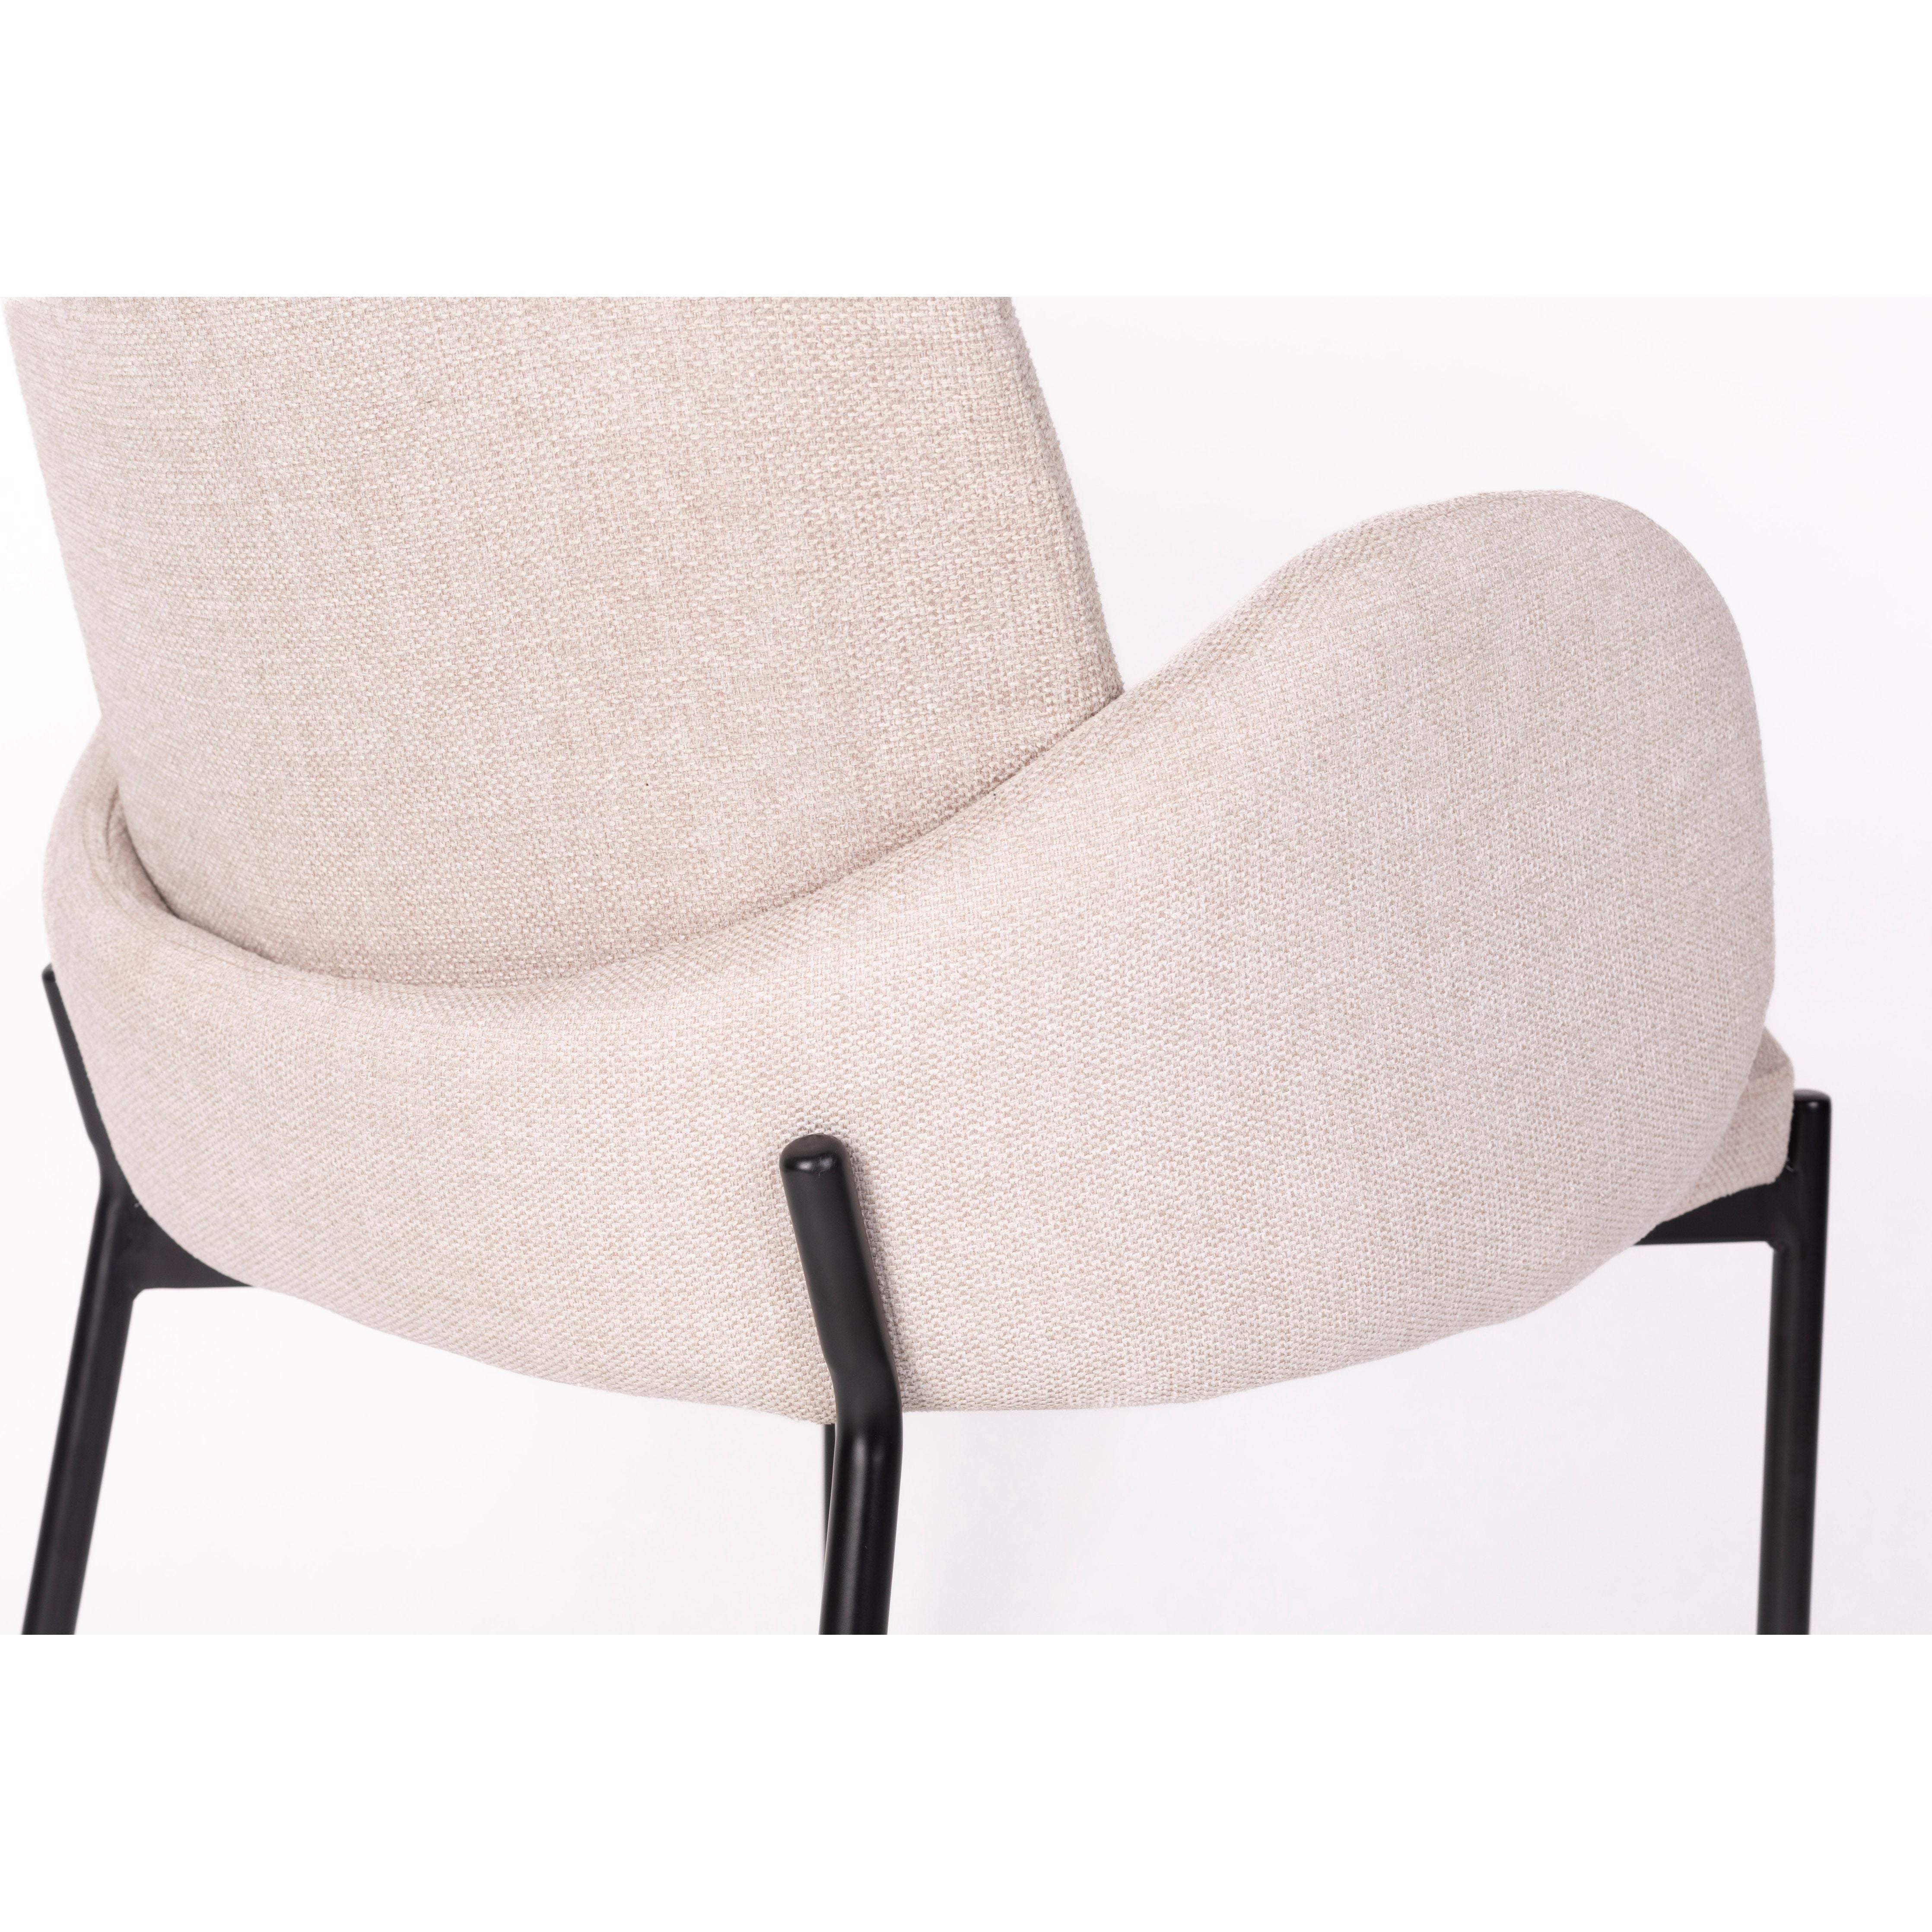 Chair tjarda taupe | 2 pieces